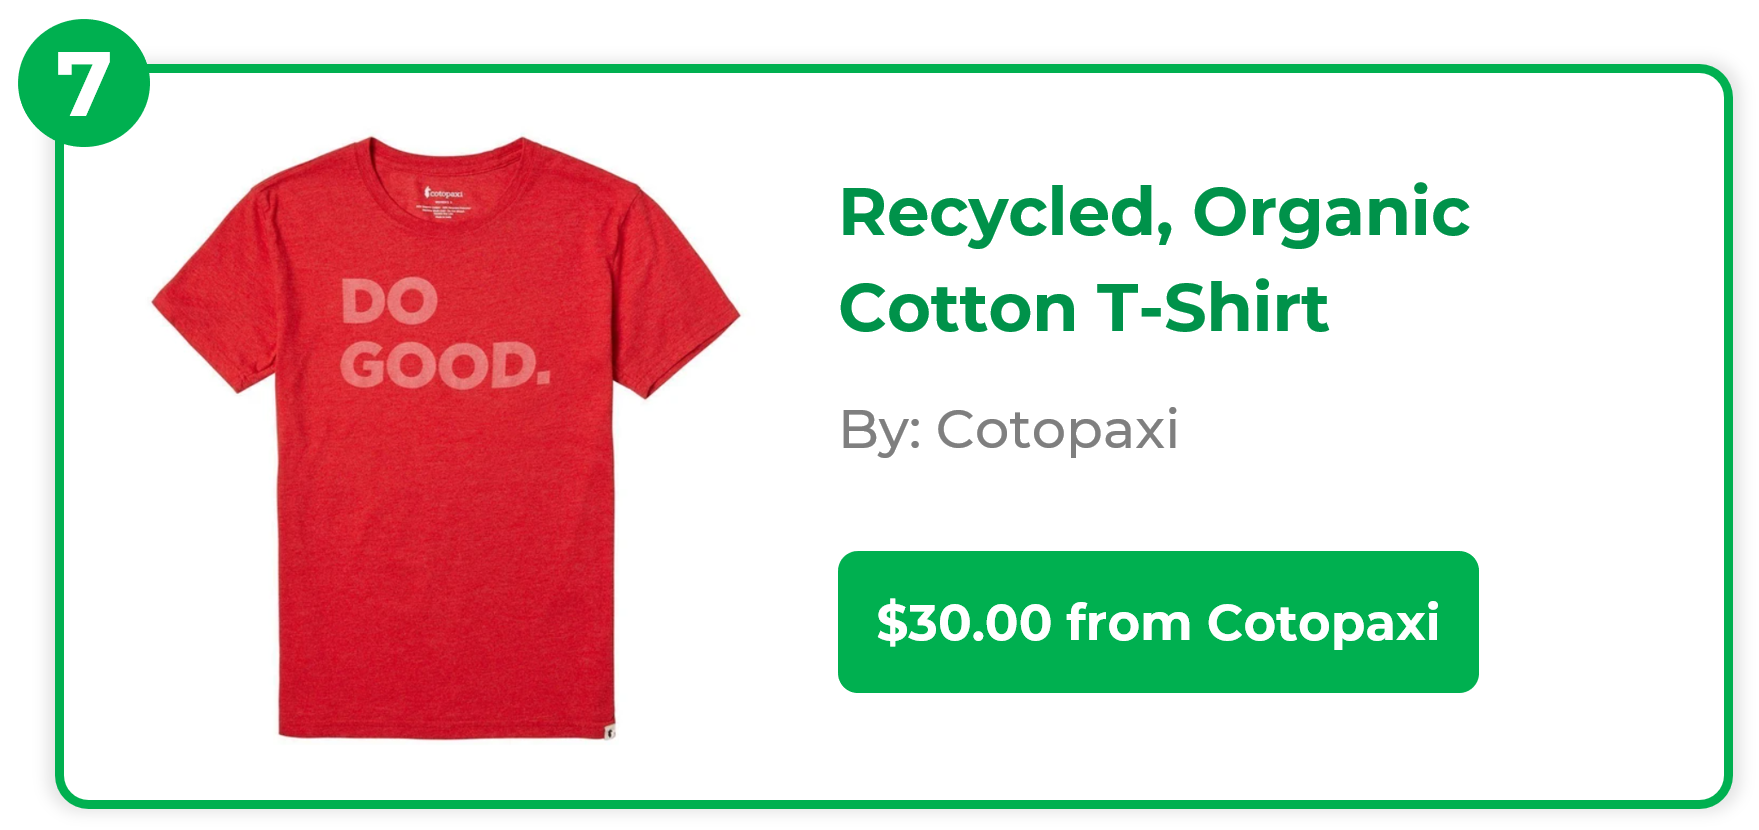 Recycled Organic Cotton T-Shirt - Cotopaxi